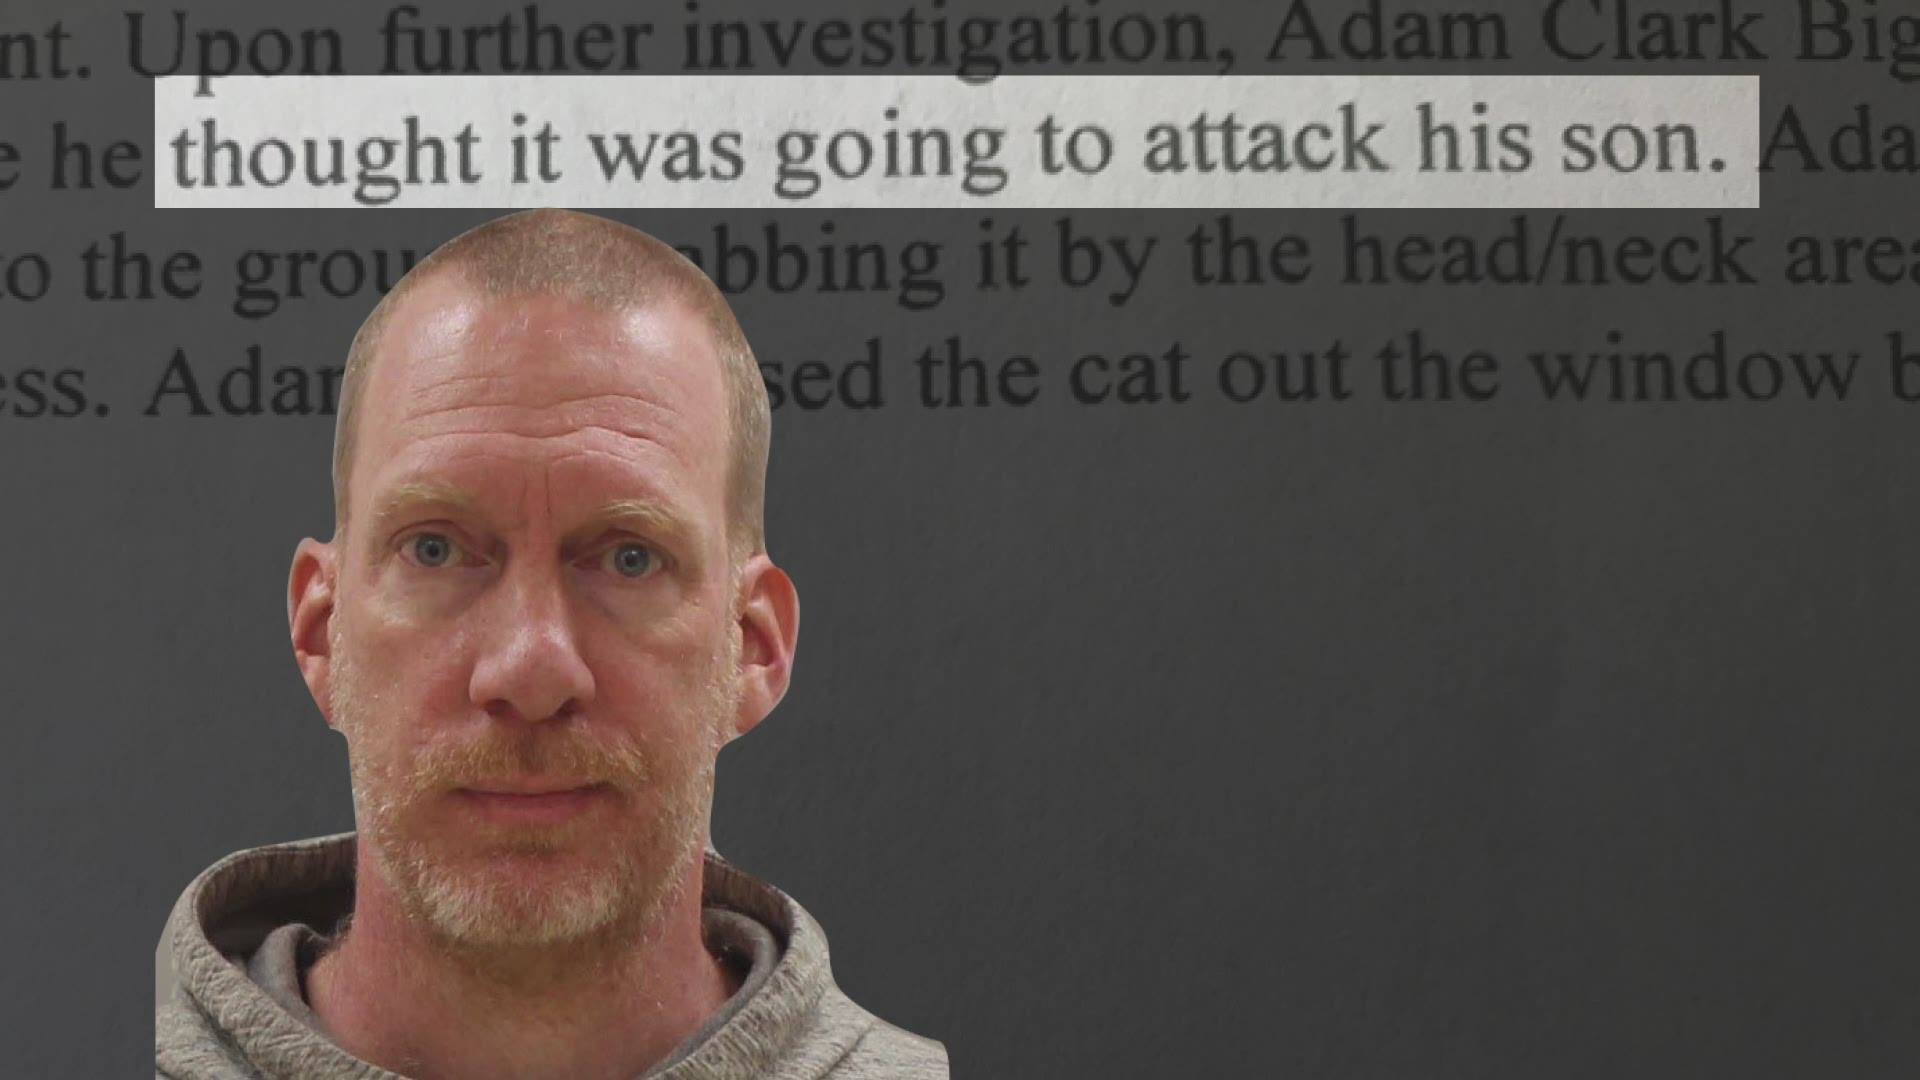 Adam Bigham said he was defending his family “by throwing the cat to the ground’’ and kneeling on its stomach “until it went lifeless,’’ court records show.